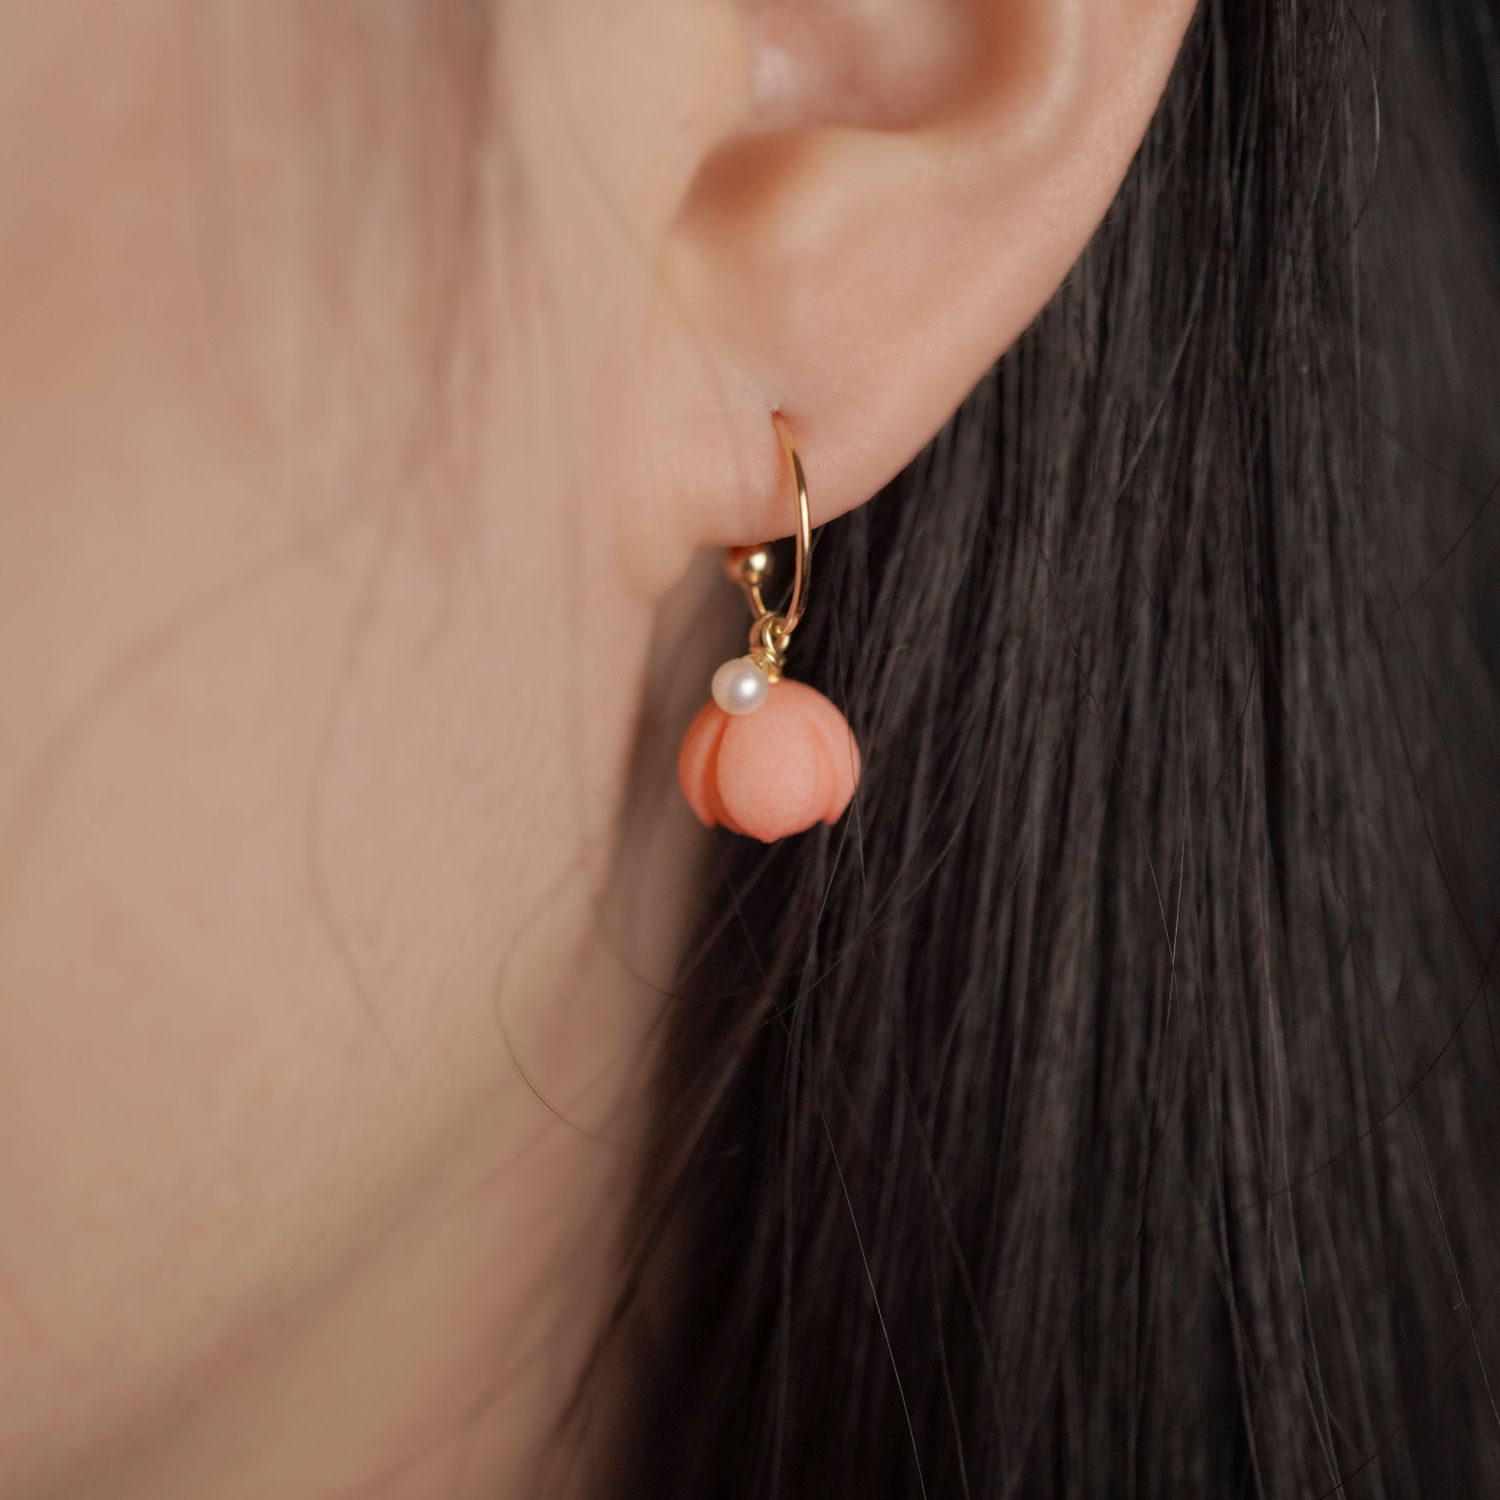 Temino Jewellery: Small Bud Earrings in Pink Product Image 1 of 2